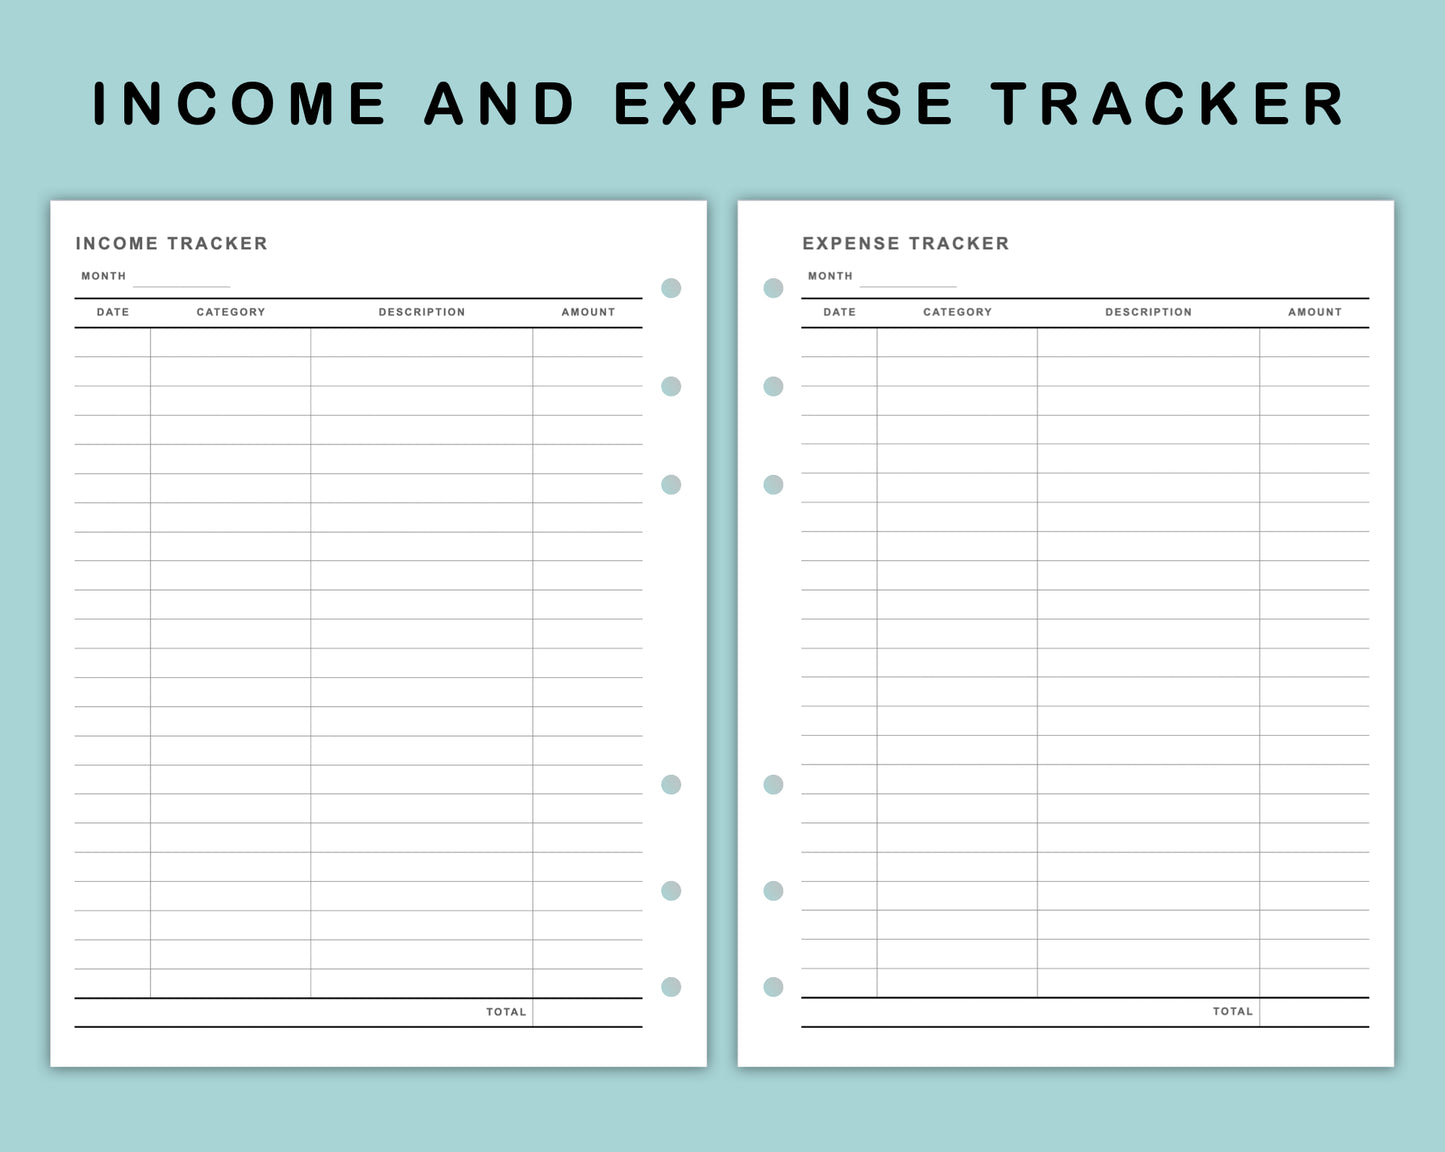 B6 Wide Inserts - Income and Expense Tracker